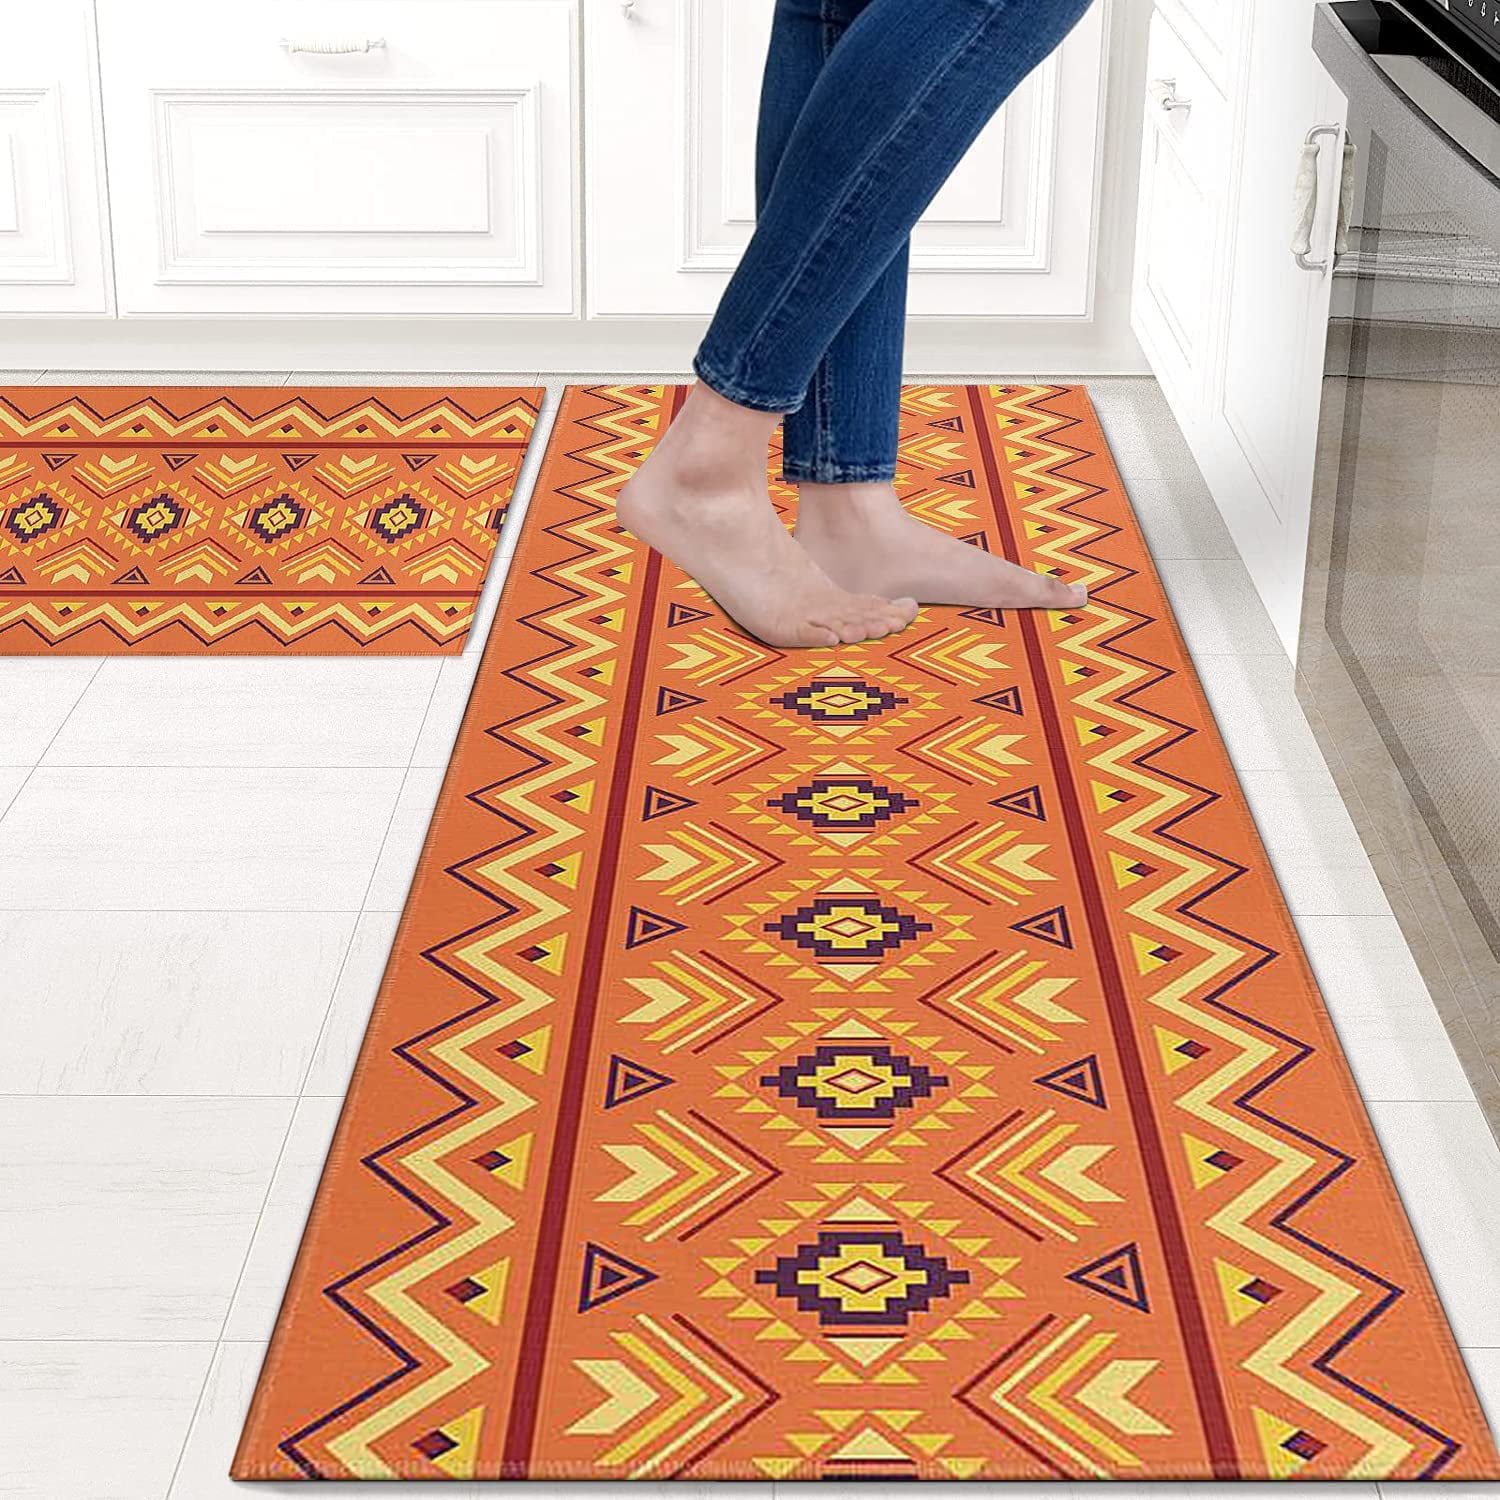  DECOMALL Maila Washable Rug Doormat 2x3, Rubber Backed Non-Slip  Rugs, Kitchen Rug, Entryway Mats Indoor, Accents Rug, Small Red Traditional  Distressed Vintage Boho Rugs, Foldable Rug, rv Carpet : Home 